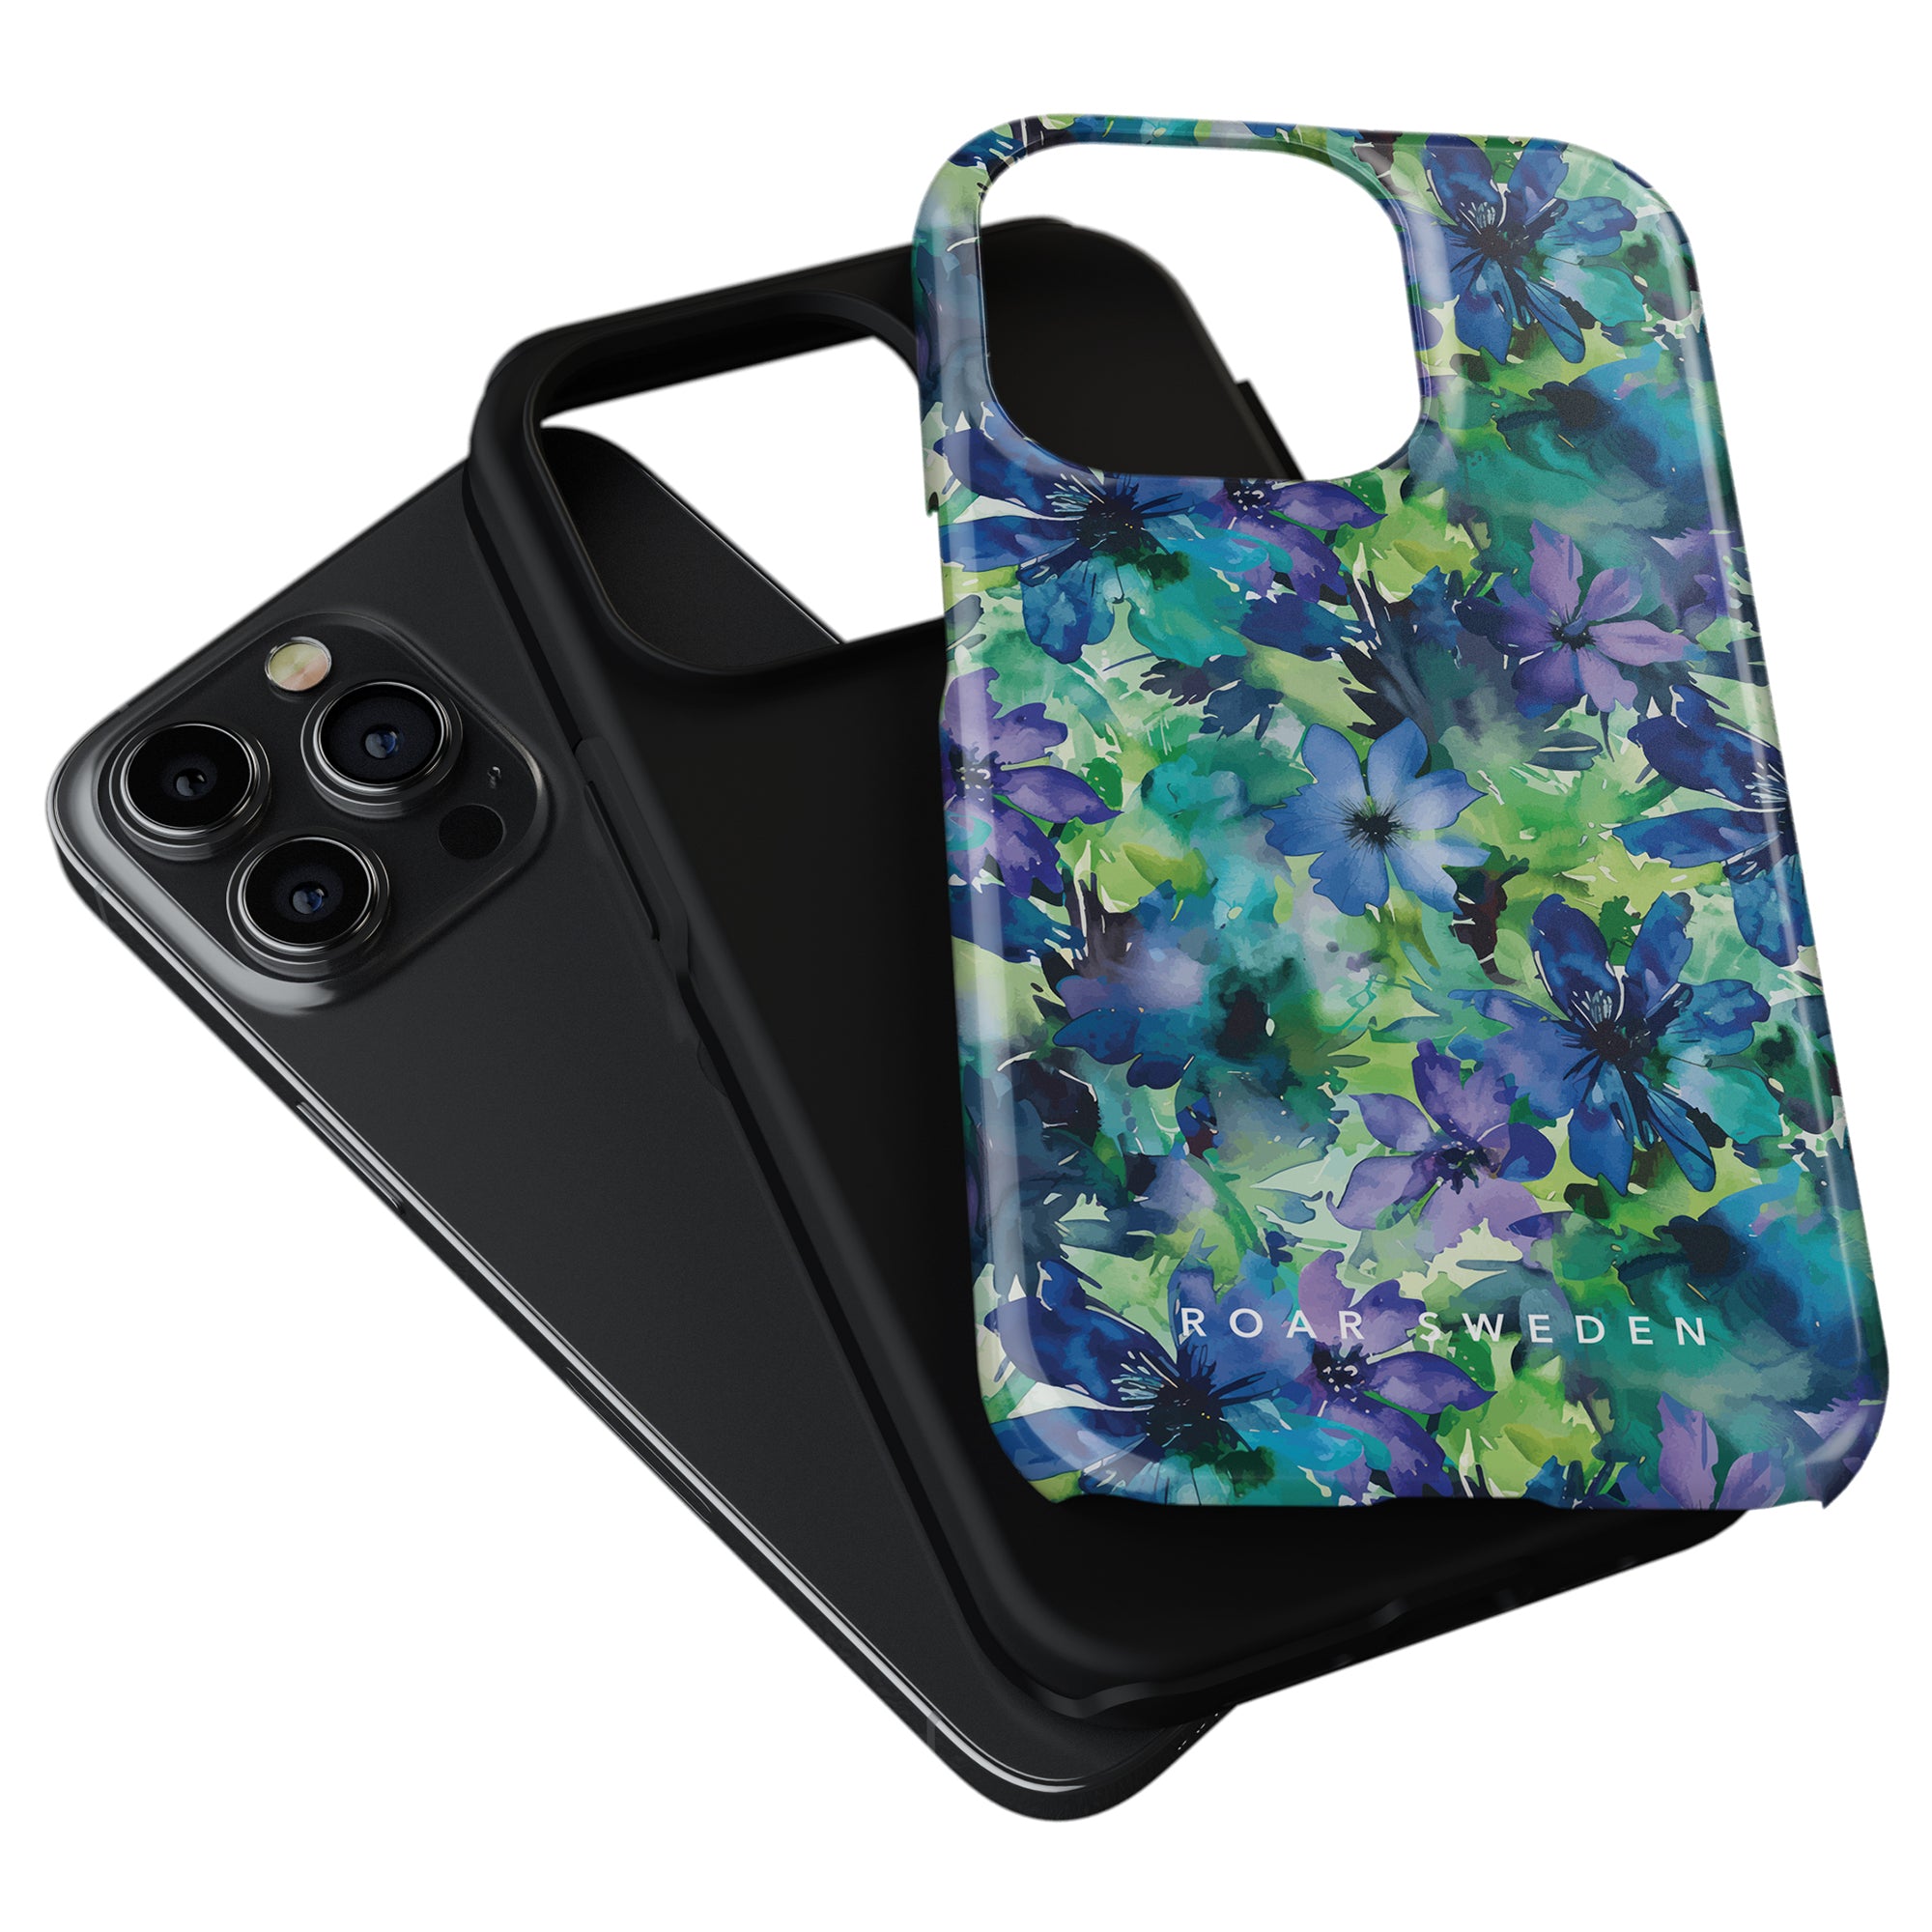 An iPhone with a black case underneath a vibrant floral-patterned phone case from the "Sweet Flower - Tough Case," marked "ROAR SWEDEN.